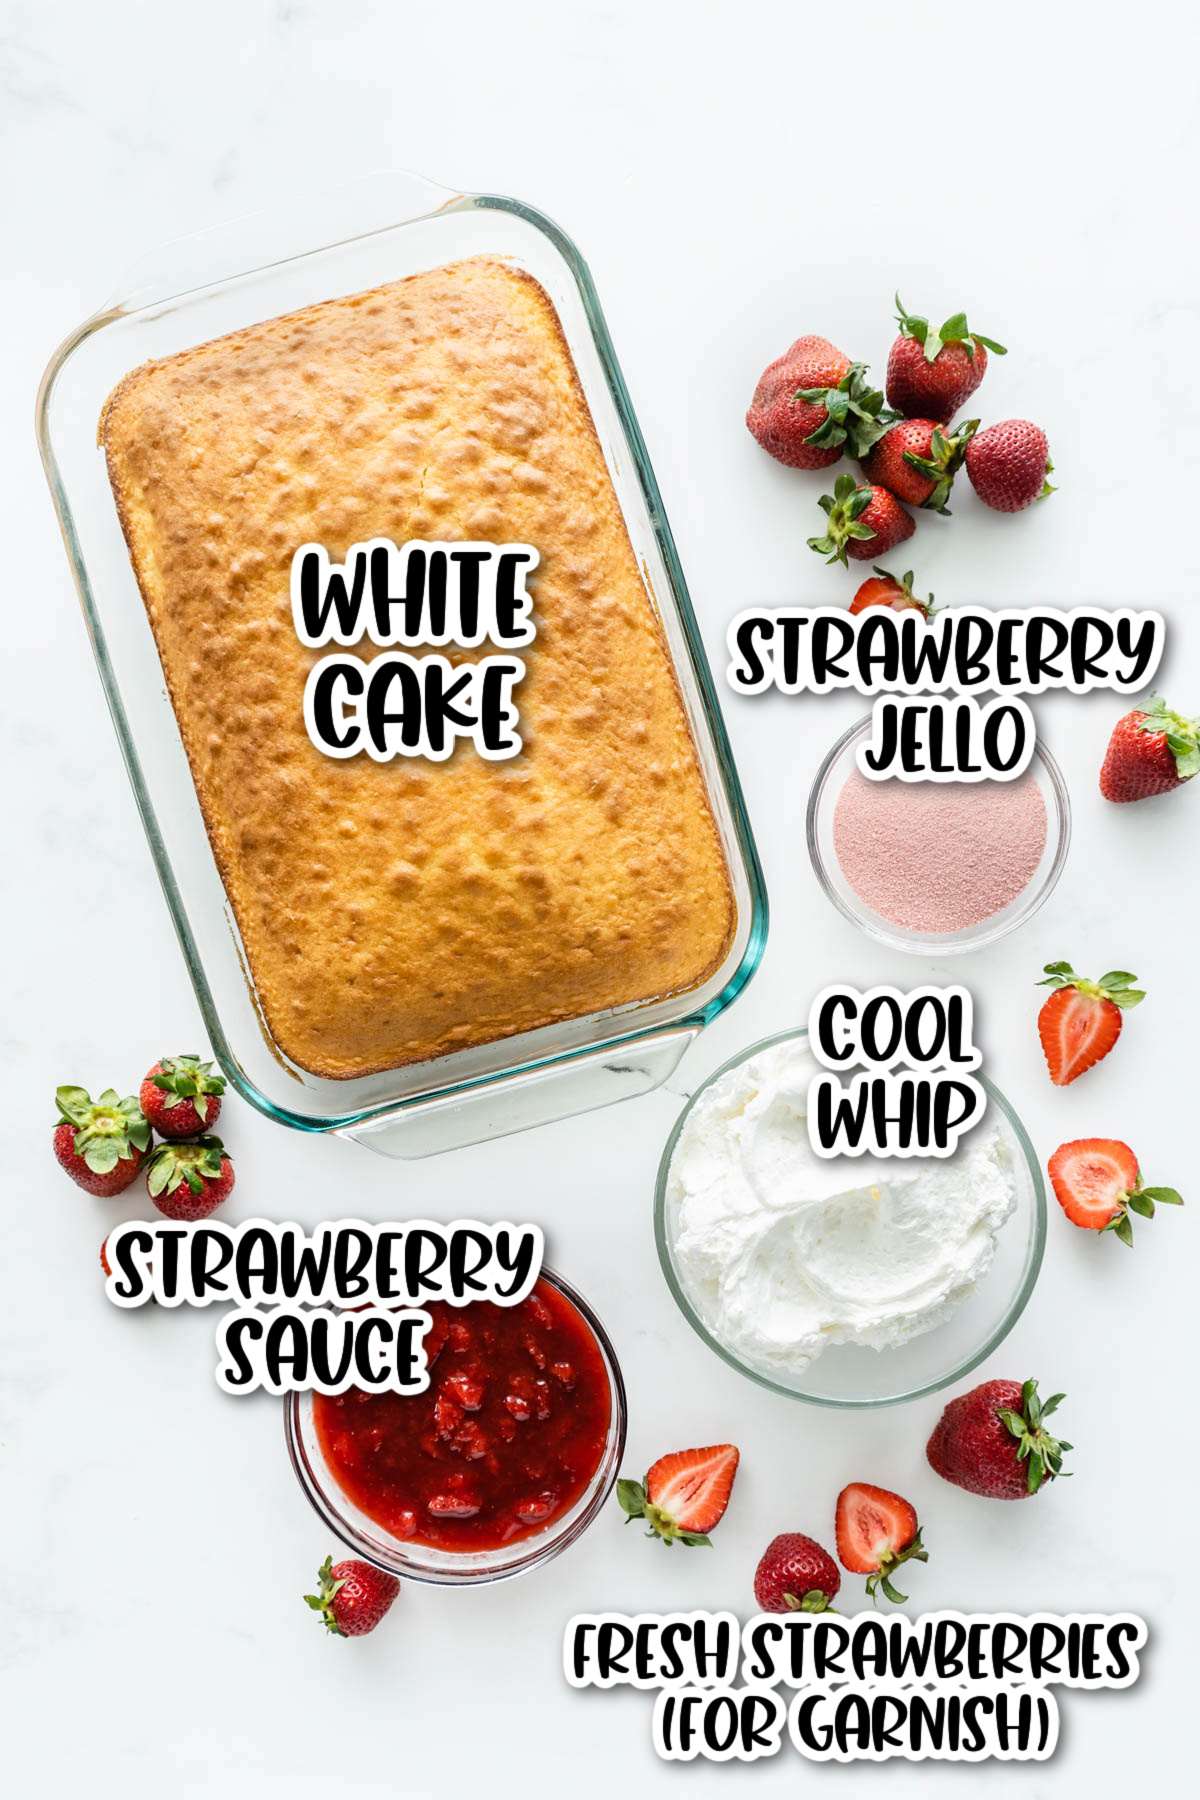 Ingredients for strawberry poke cake displayed: baked white cake, strawberry jello, cool whip, strawberry sauce, and fresh strawberries for garnish.